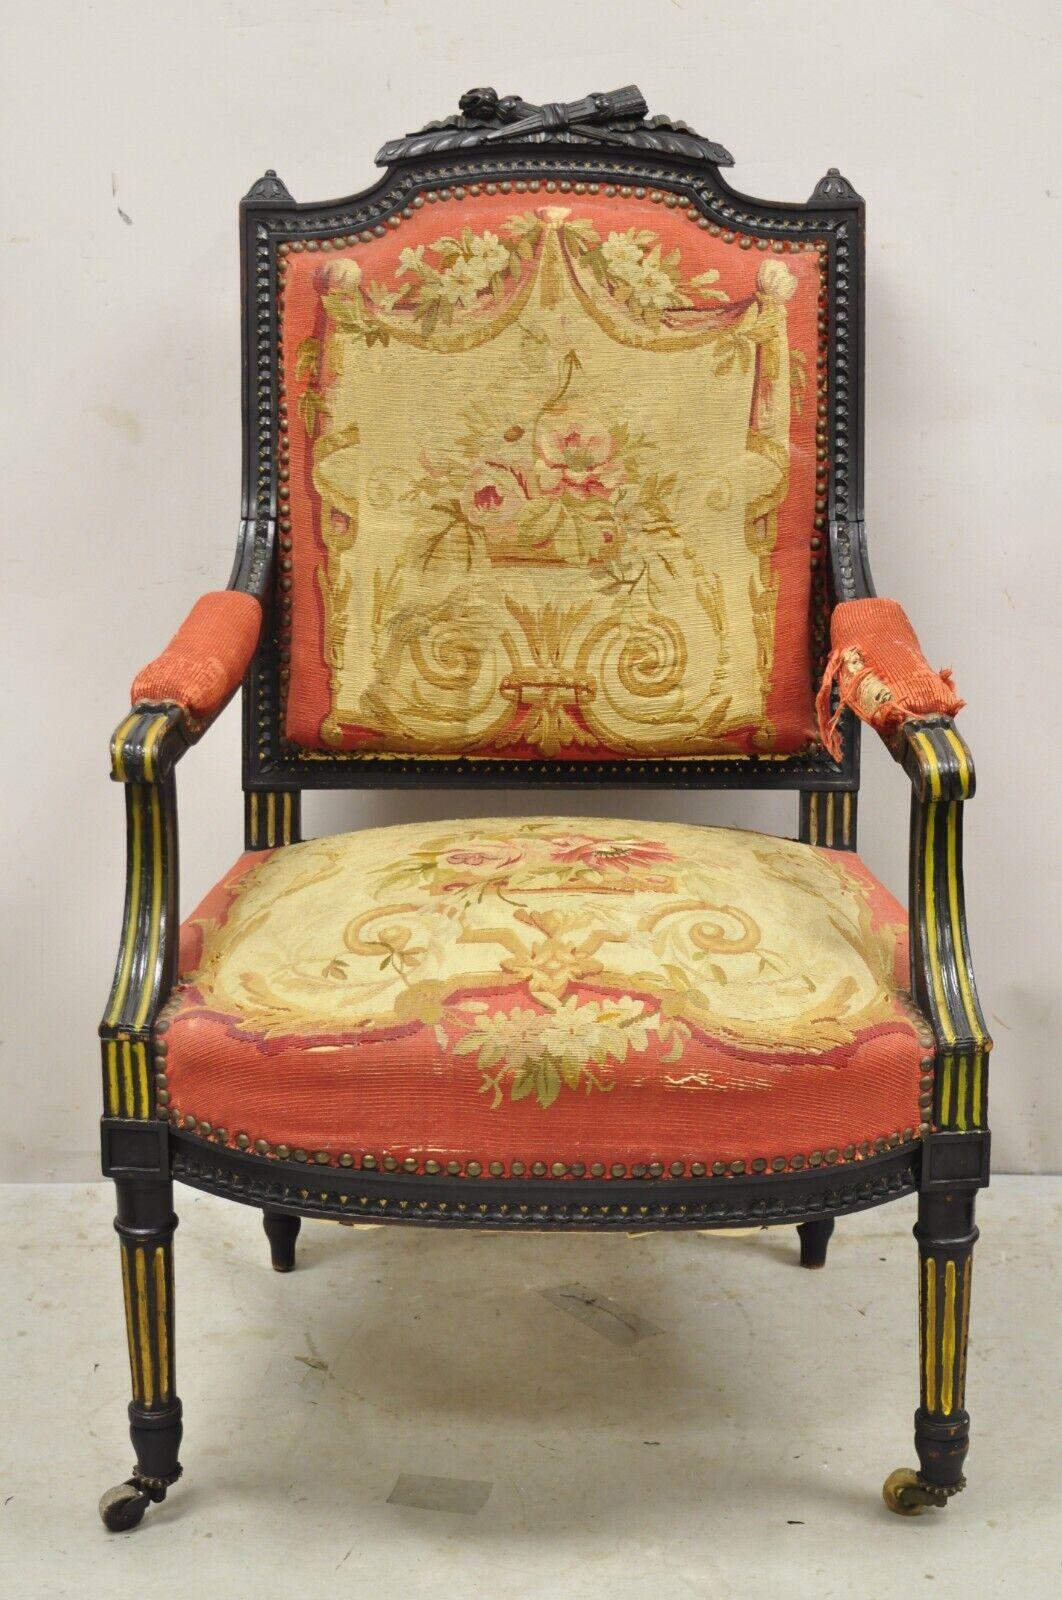 Antique French Empire Black Ebonized Walnut Needlepoint Parlor Arm Chair. Item features a coral floral needlepoint upholstery, torch and flame carved crust, gold painted finish, very nice antique item. Circa 19th Century. Measurements: 39.5